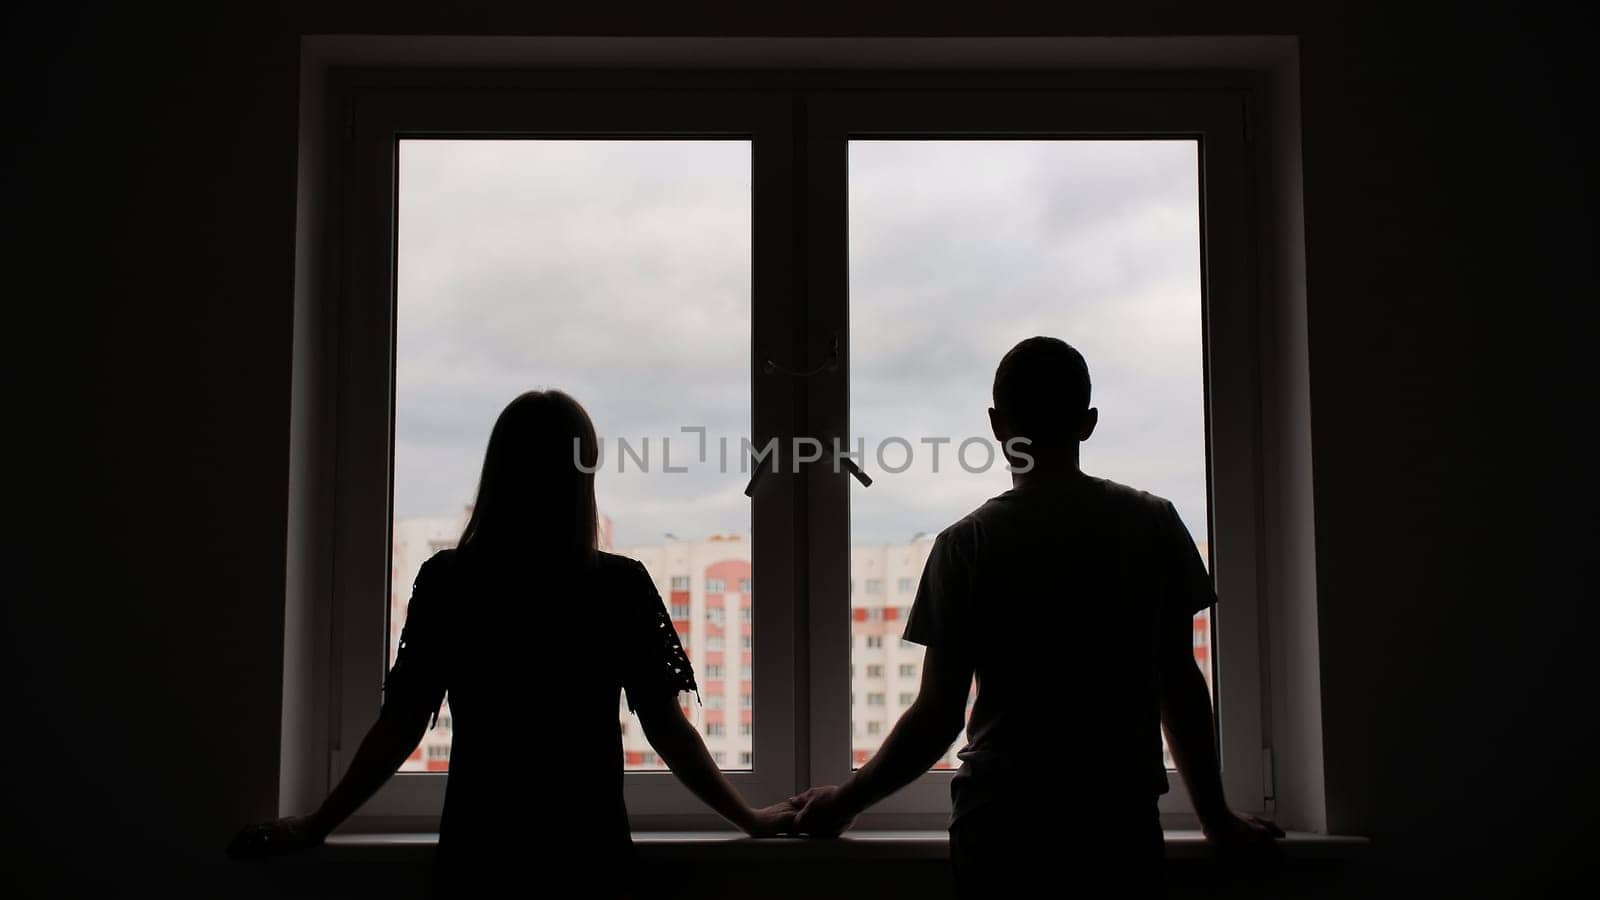 The silhouette of the newlyweds on the background of windows from a new apartment